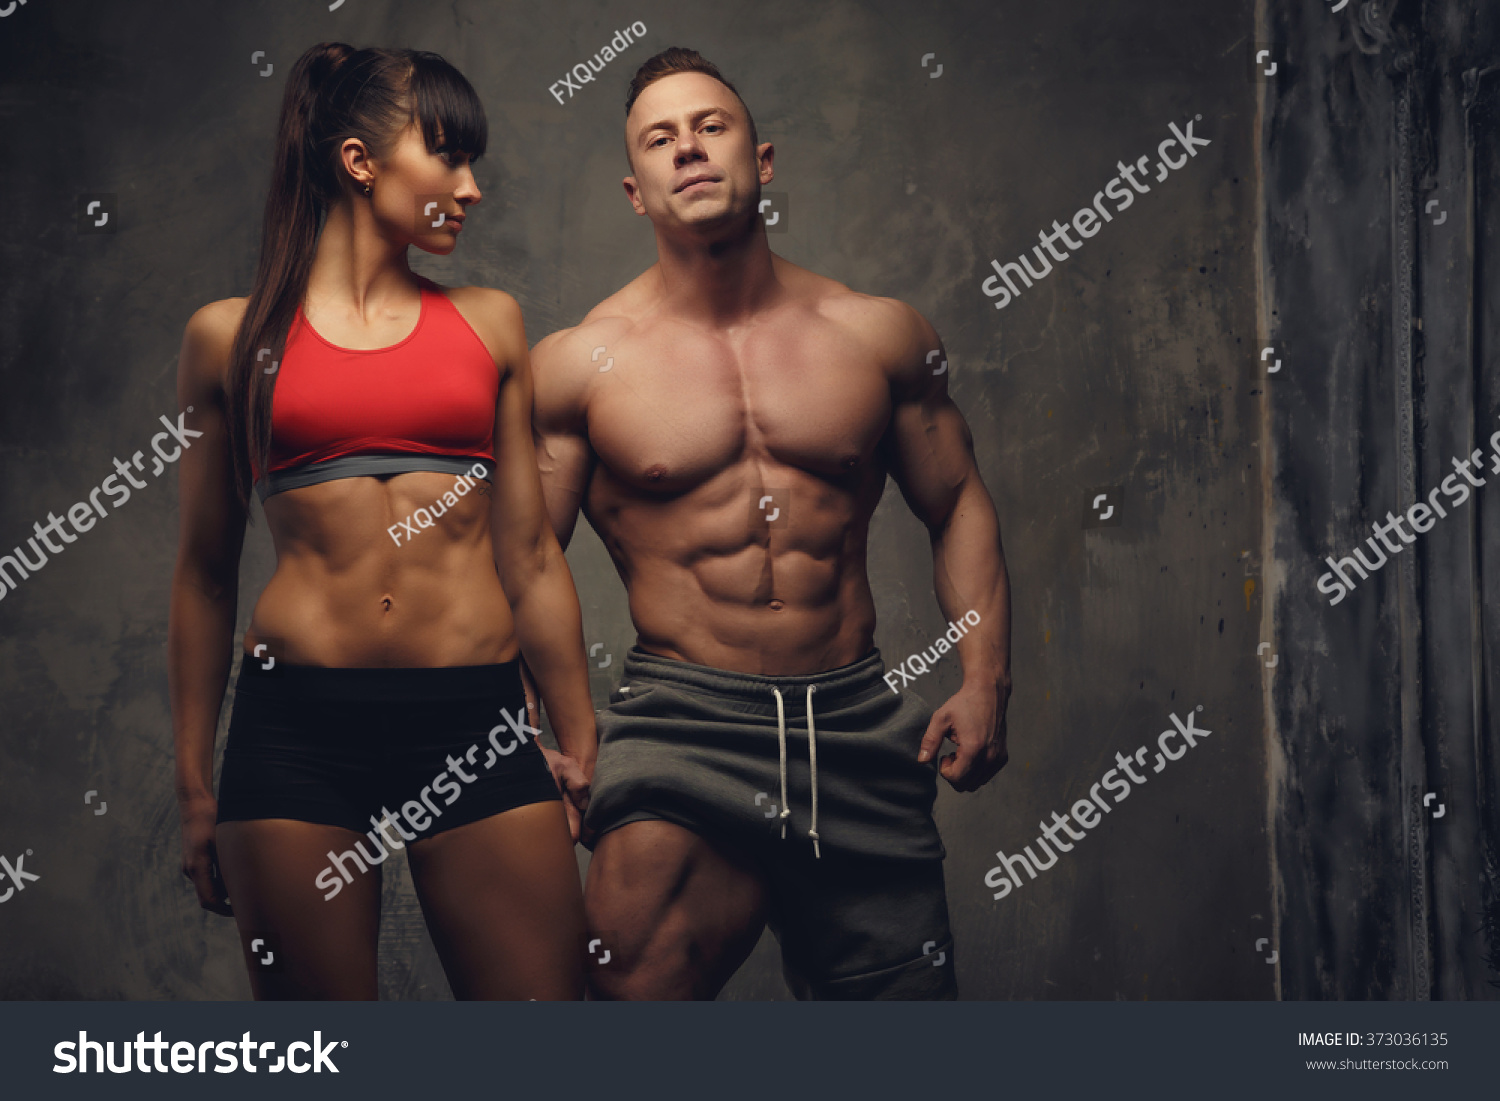 Fitness Couple Shirtless Bodybuilder And Fitness Woman In Sportswear